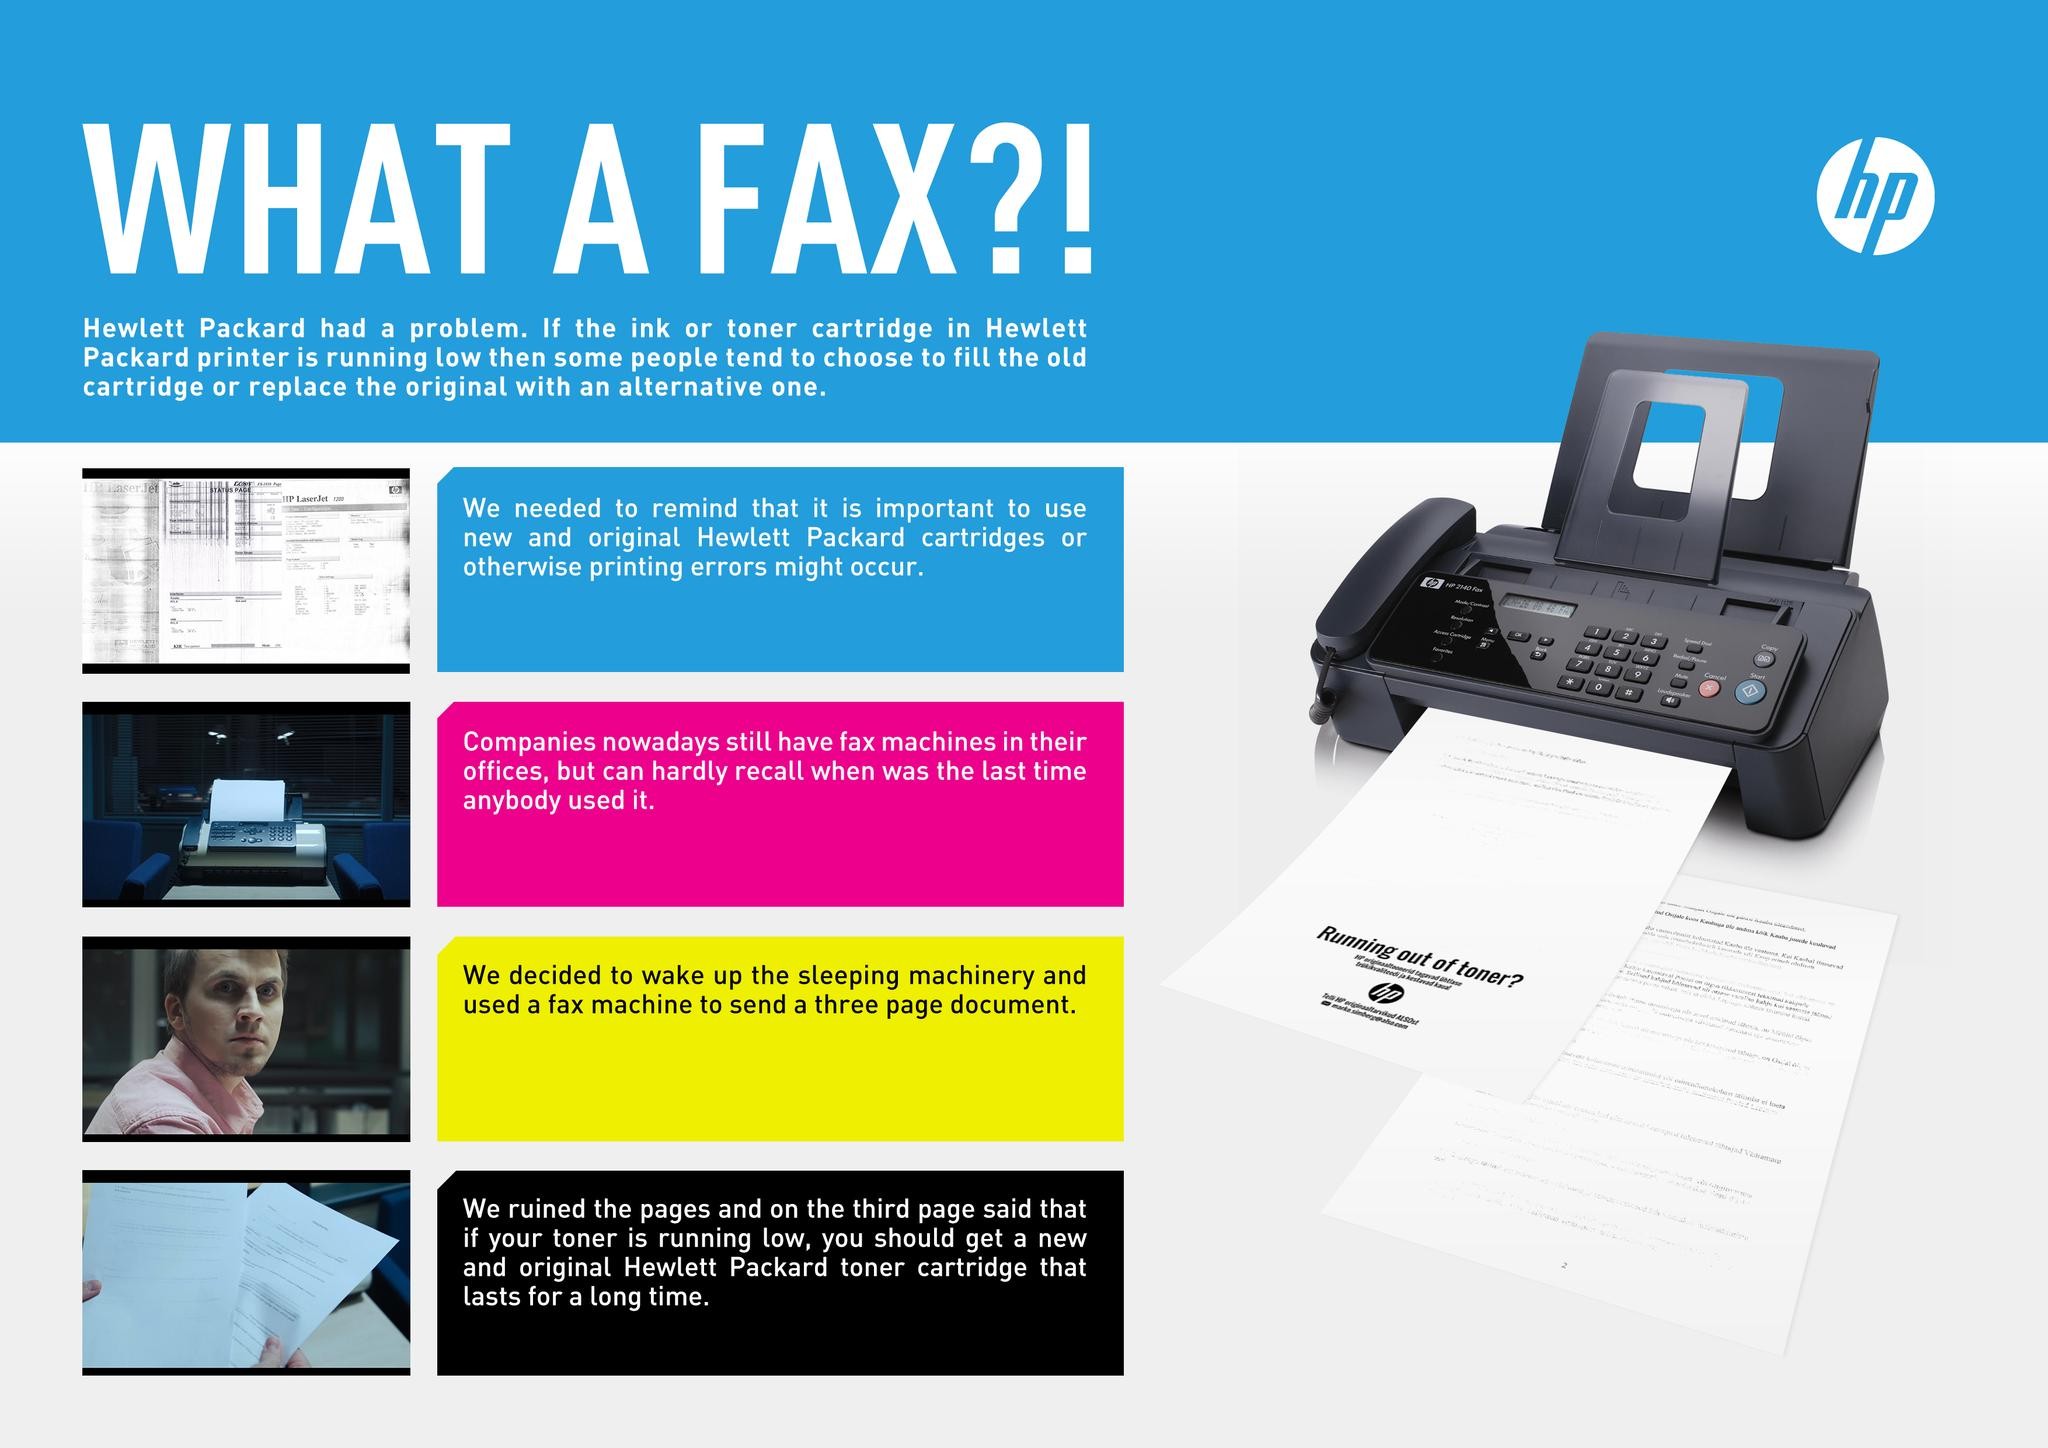 WHAT A FAX?!